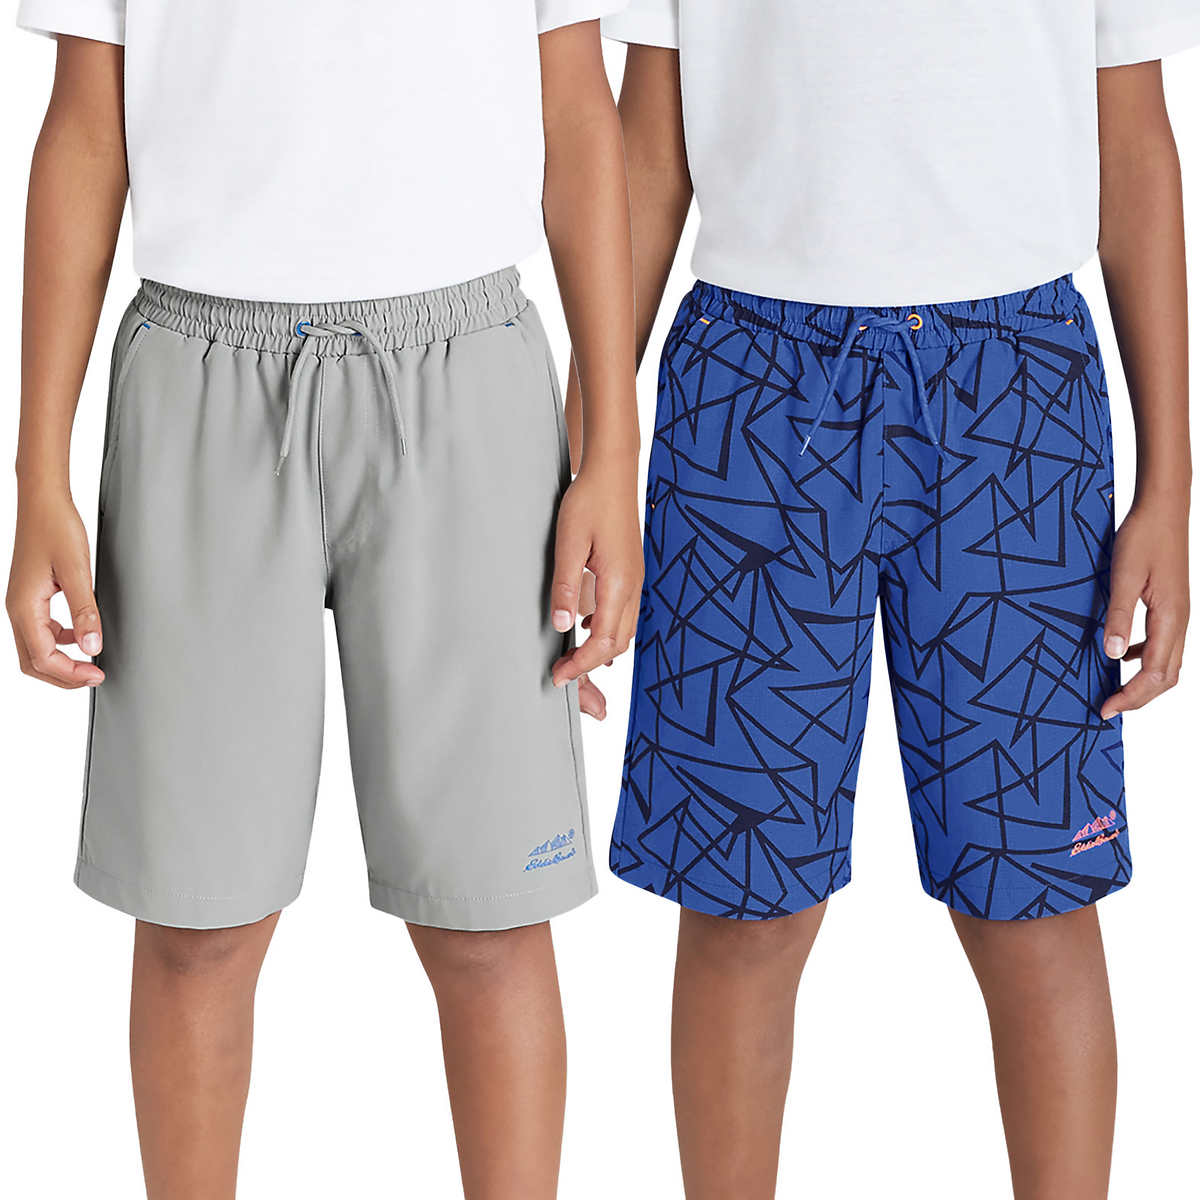 Eddie Bauer Big Boy's 2-pack Youth Hybrid Quick Dry Mesh Lined Casual Active Shorts